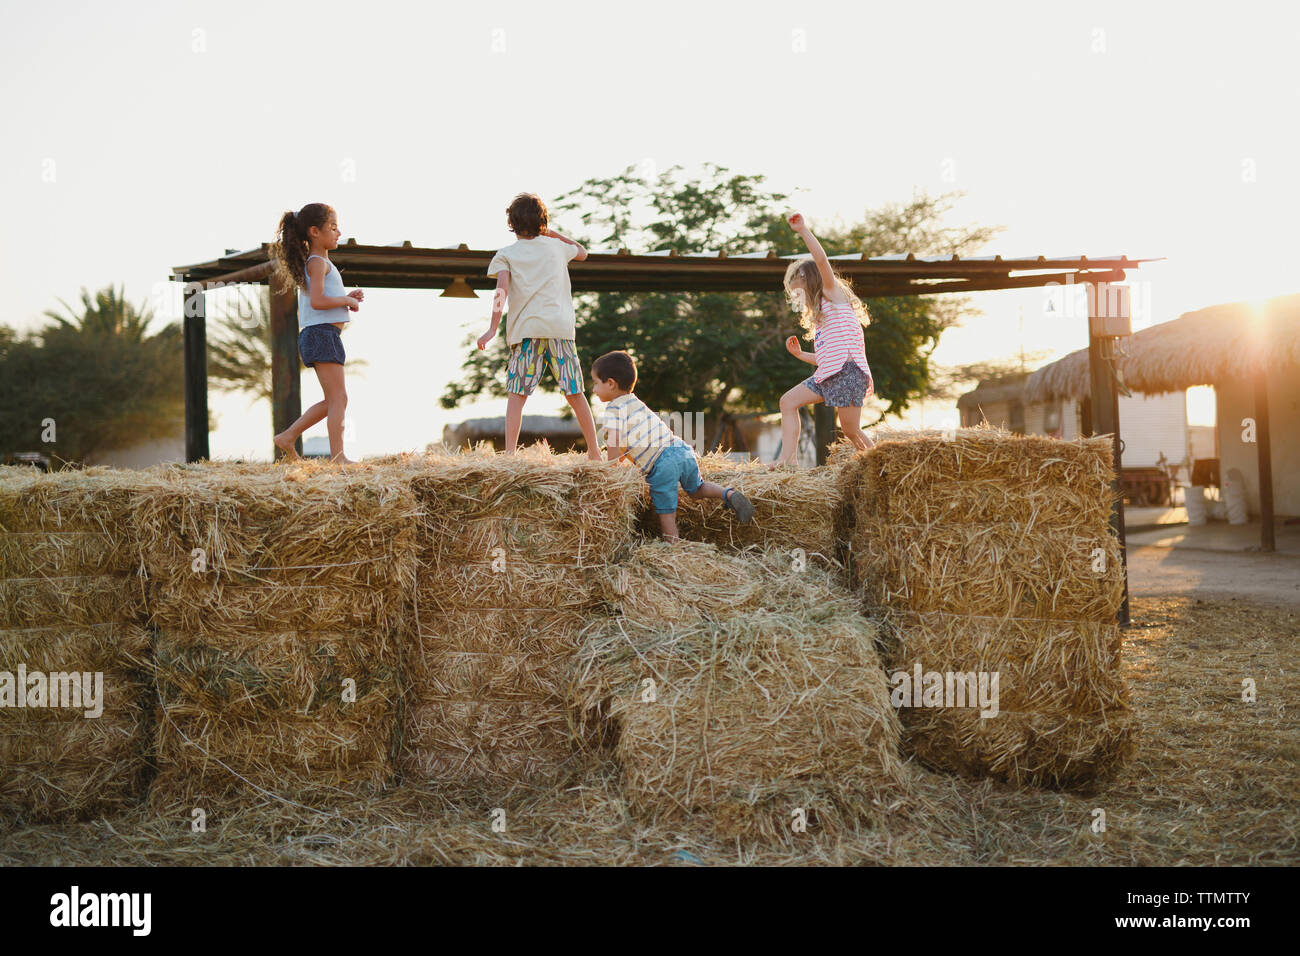 Kids standing and playing on hay bales Stock Photo